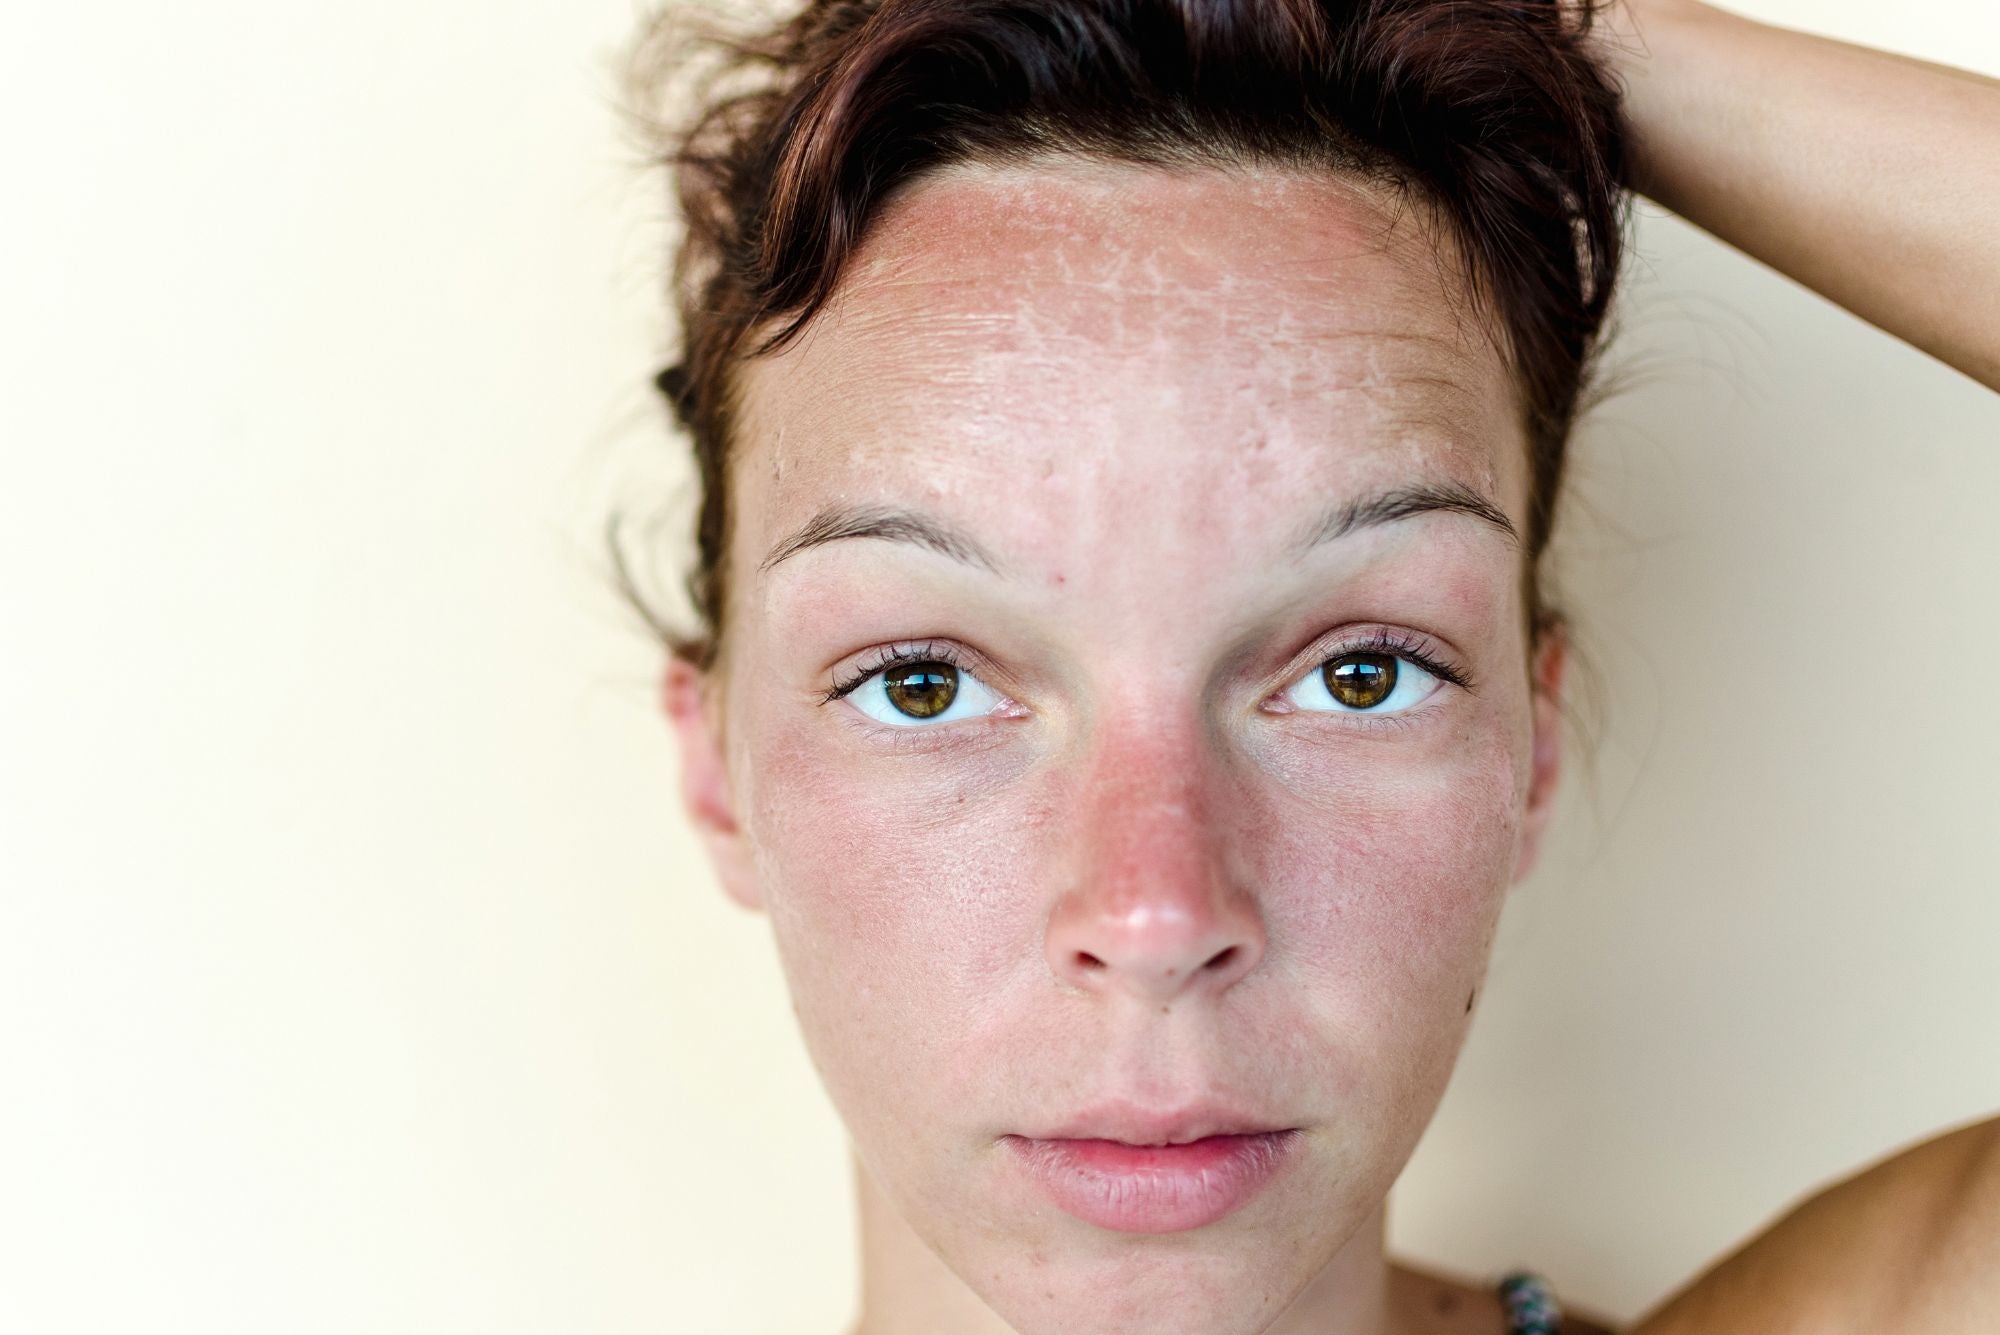 A woman with a sunburn on her face is curious if the sun helps with acne.